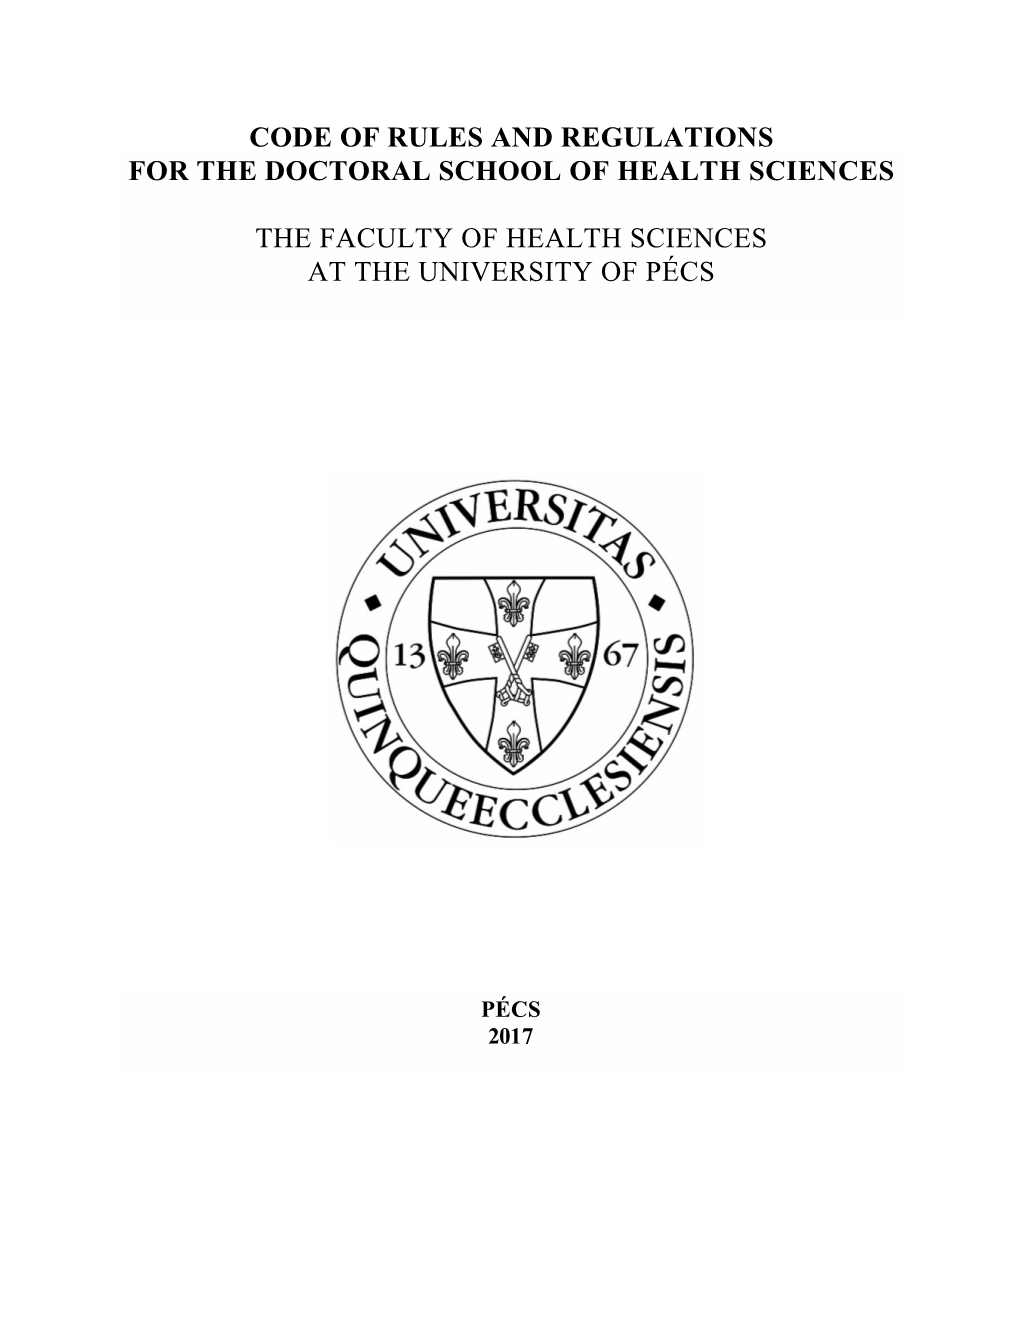 Code of Rules and Regulations for the Doctoral School of Health Sciences